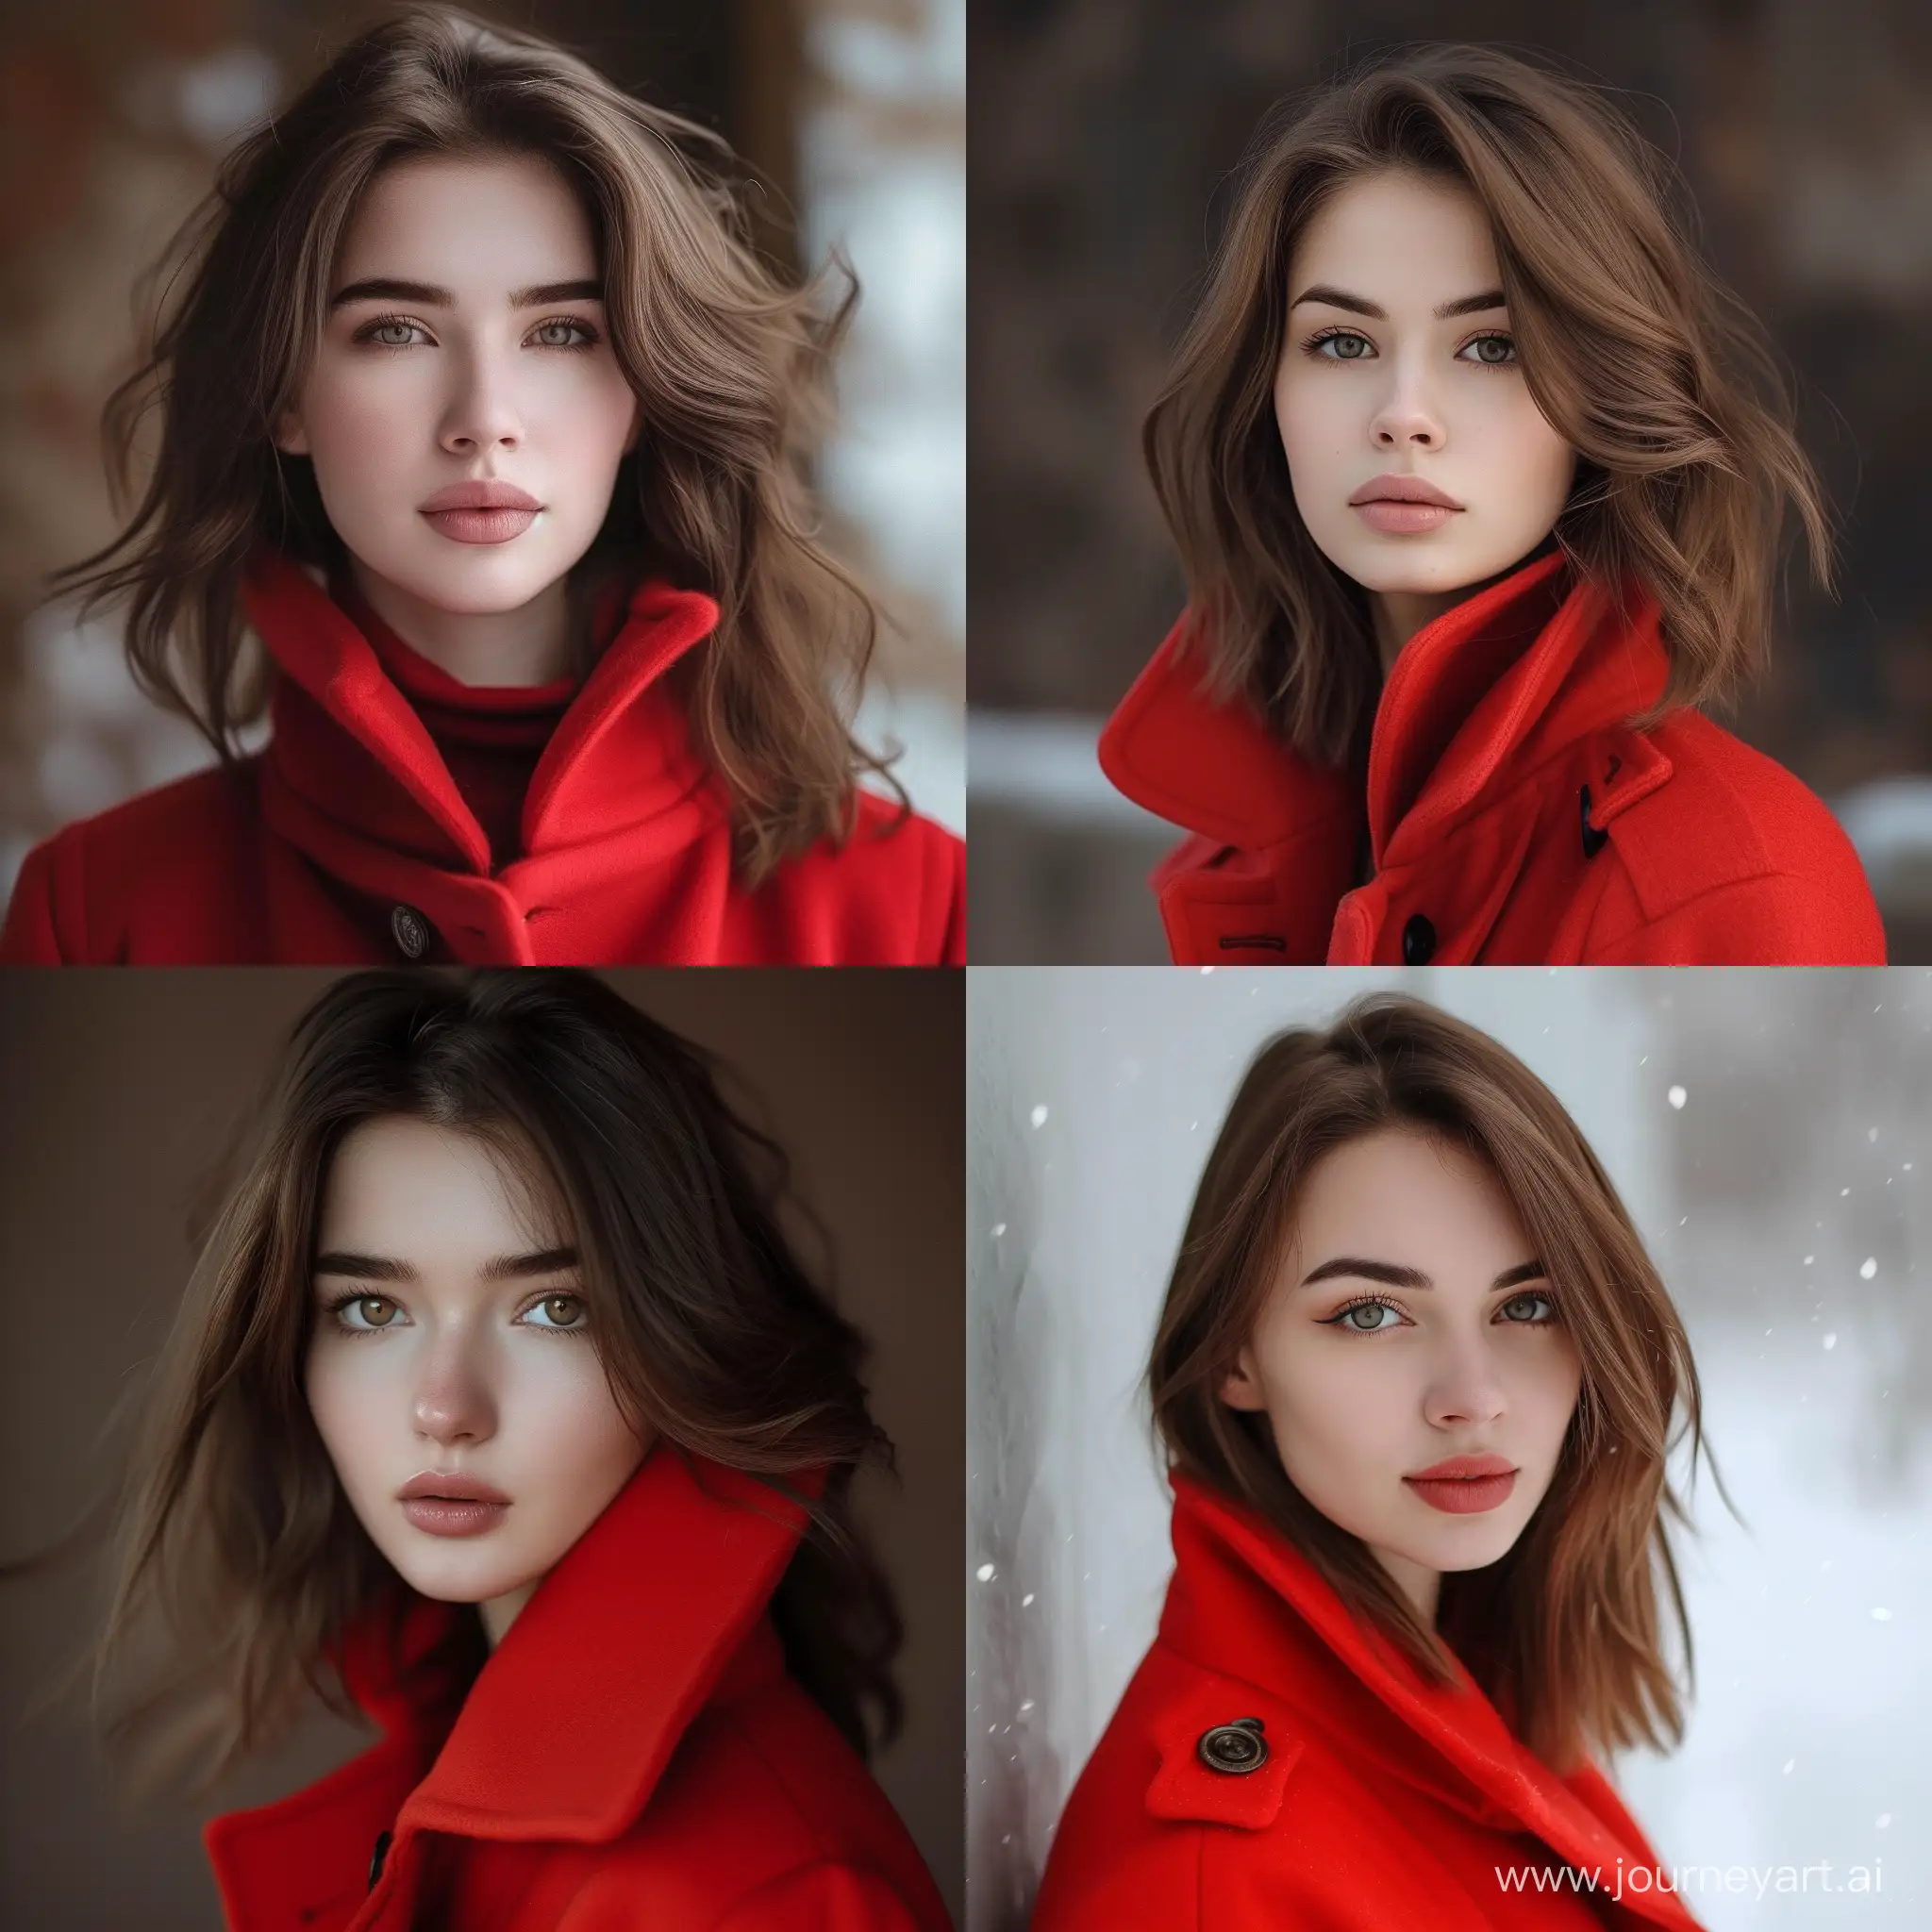 Captivating-Russian-Model-in-Red-Coat-Beautiful-and-Youthful-Catgirl-Look